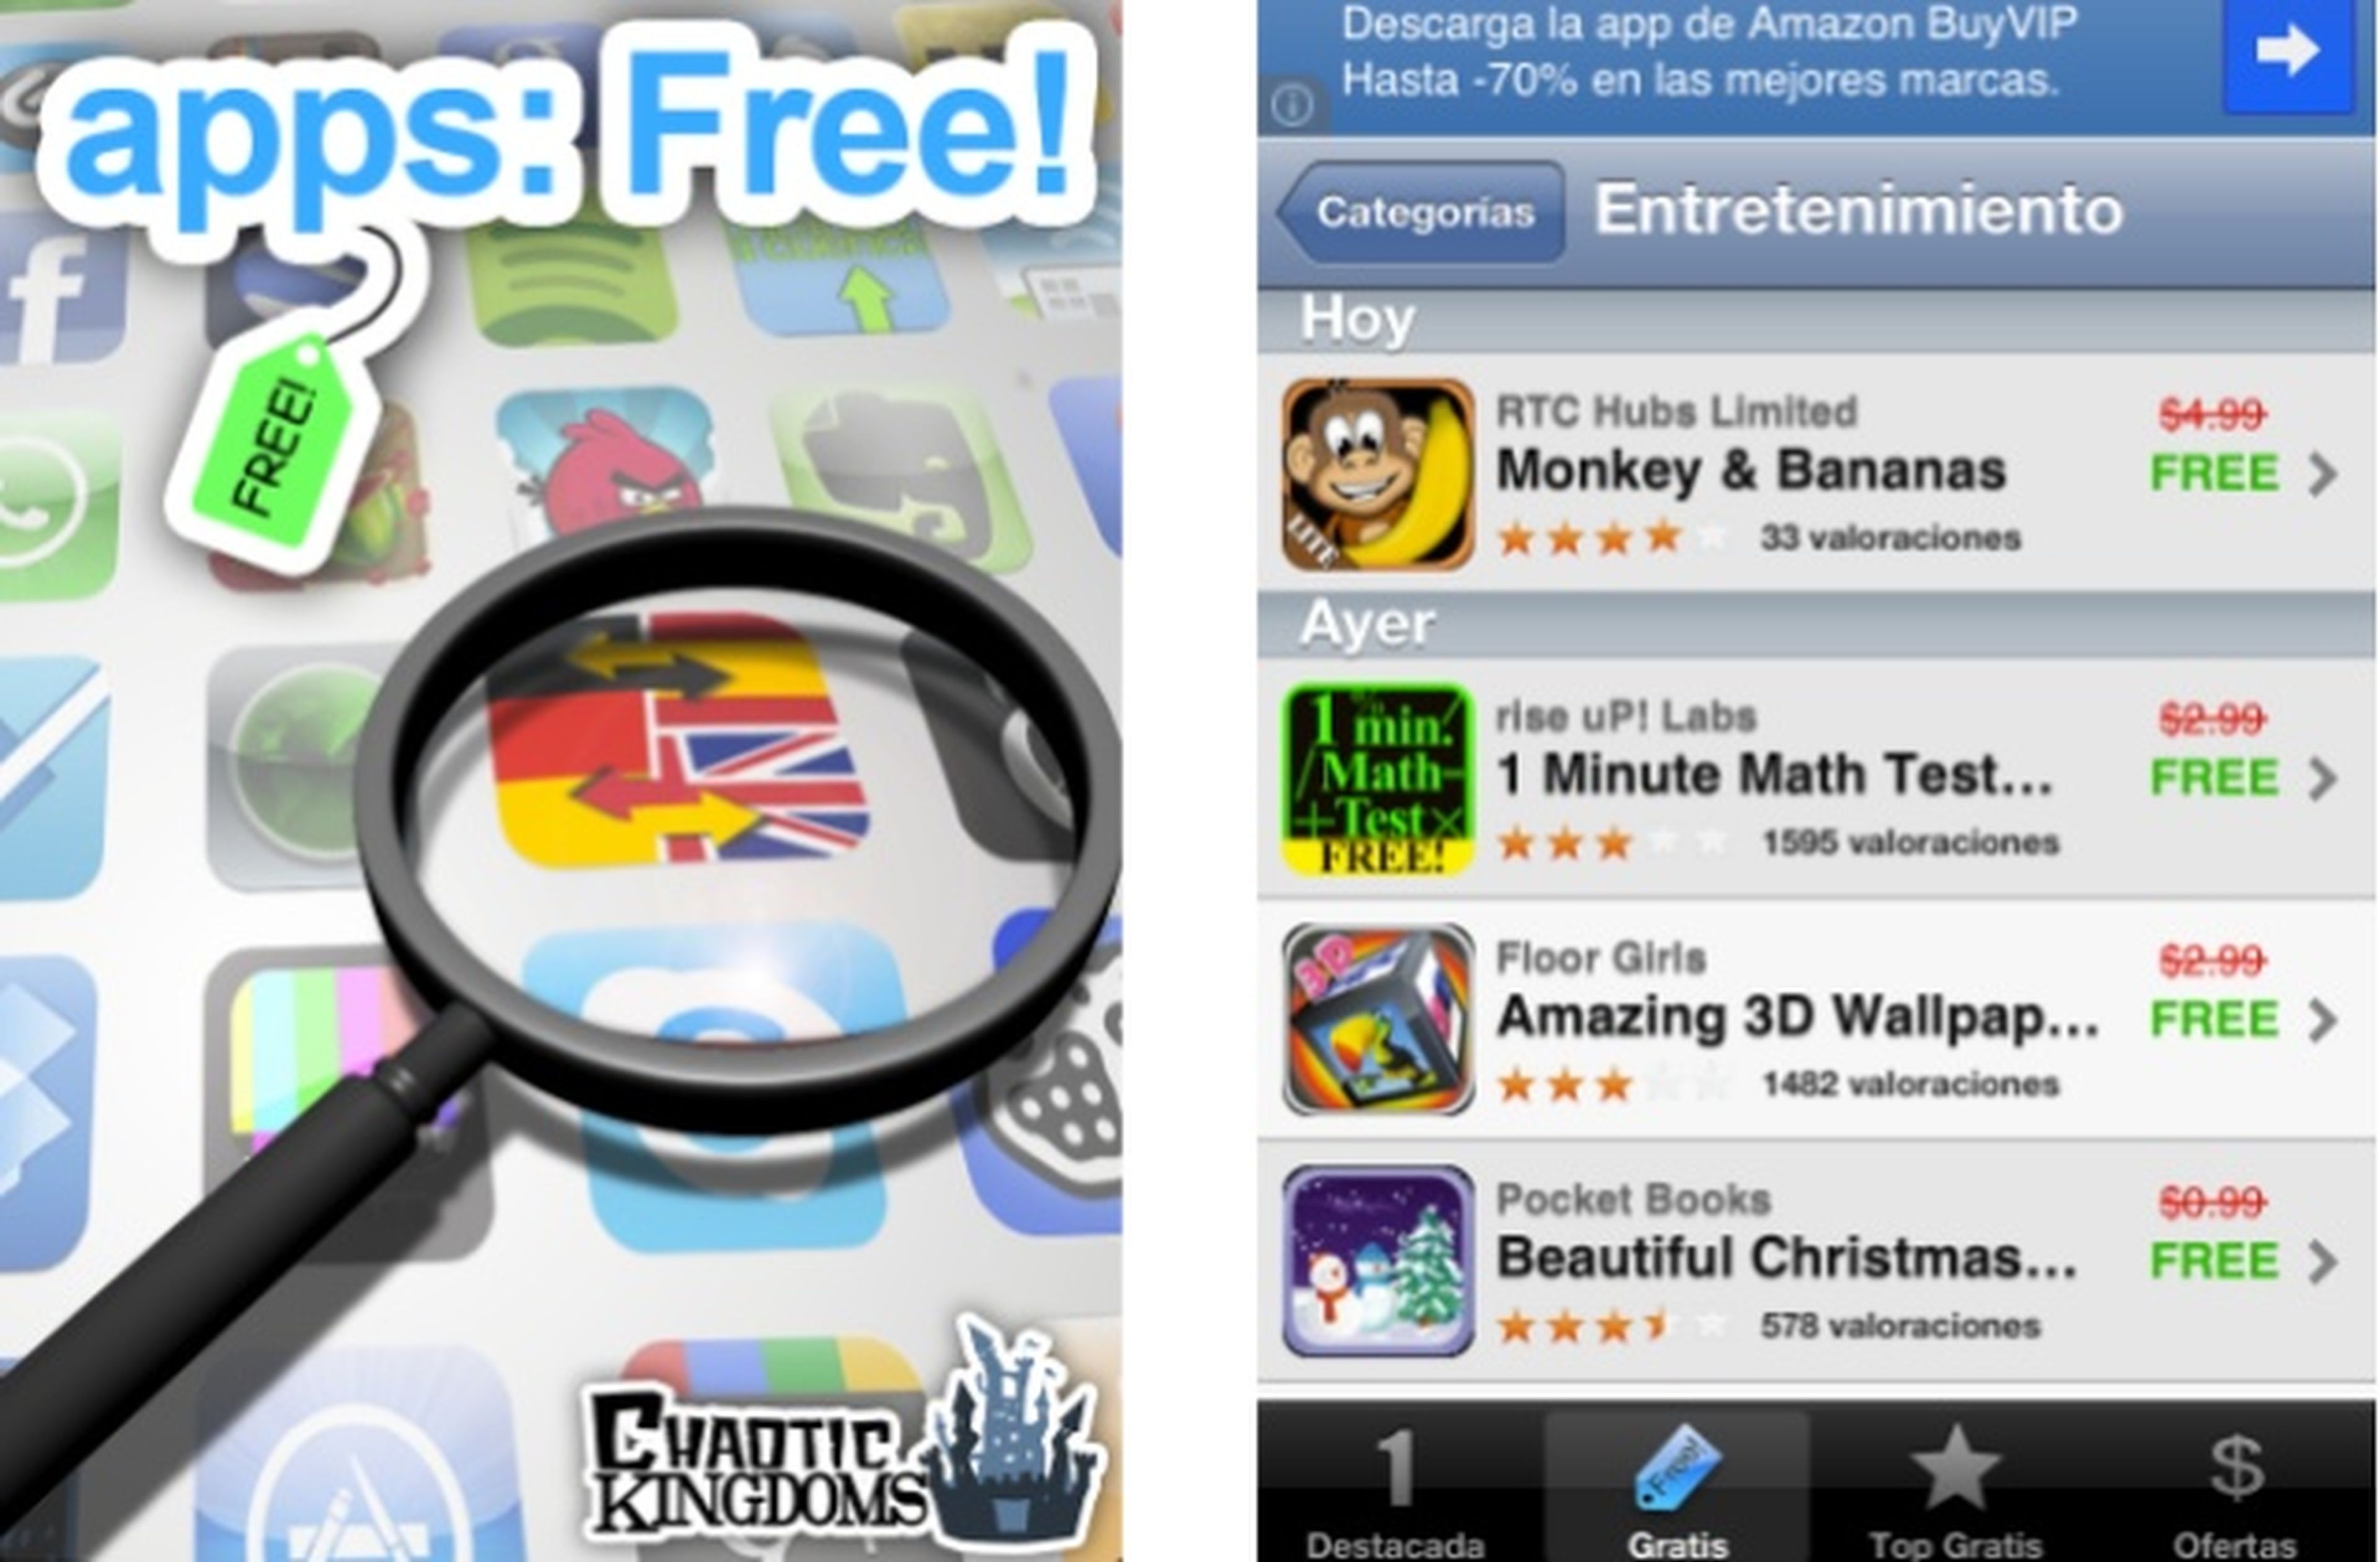 apps: Free!